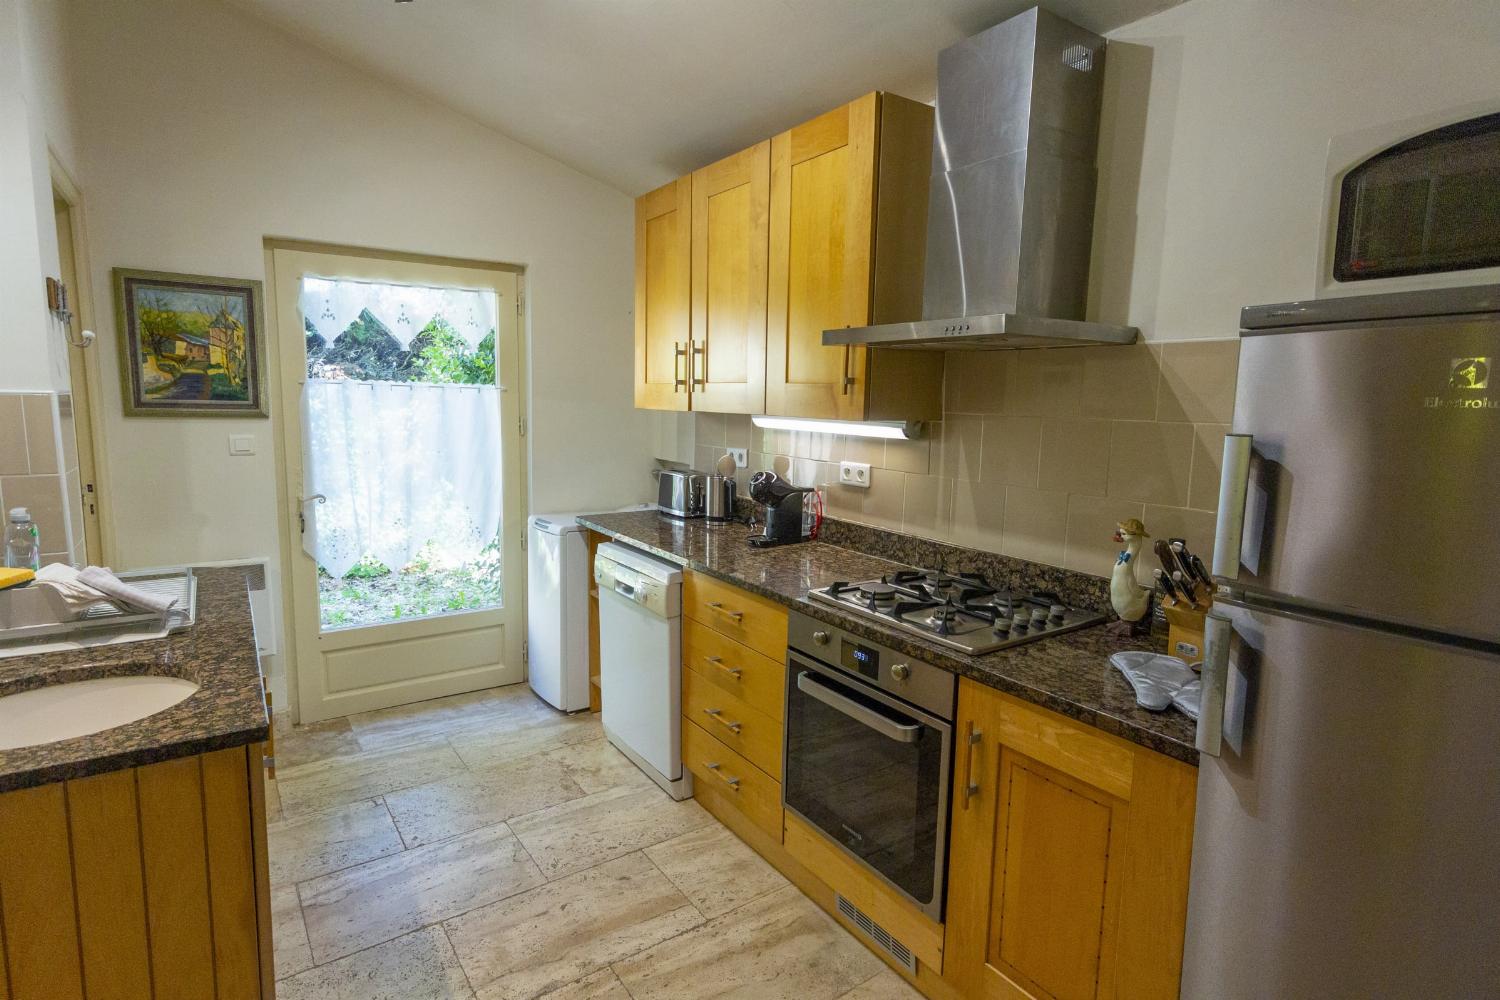 Kitchen | Holiday home in Sarlat